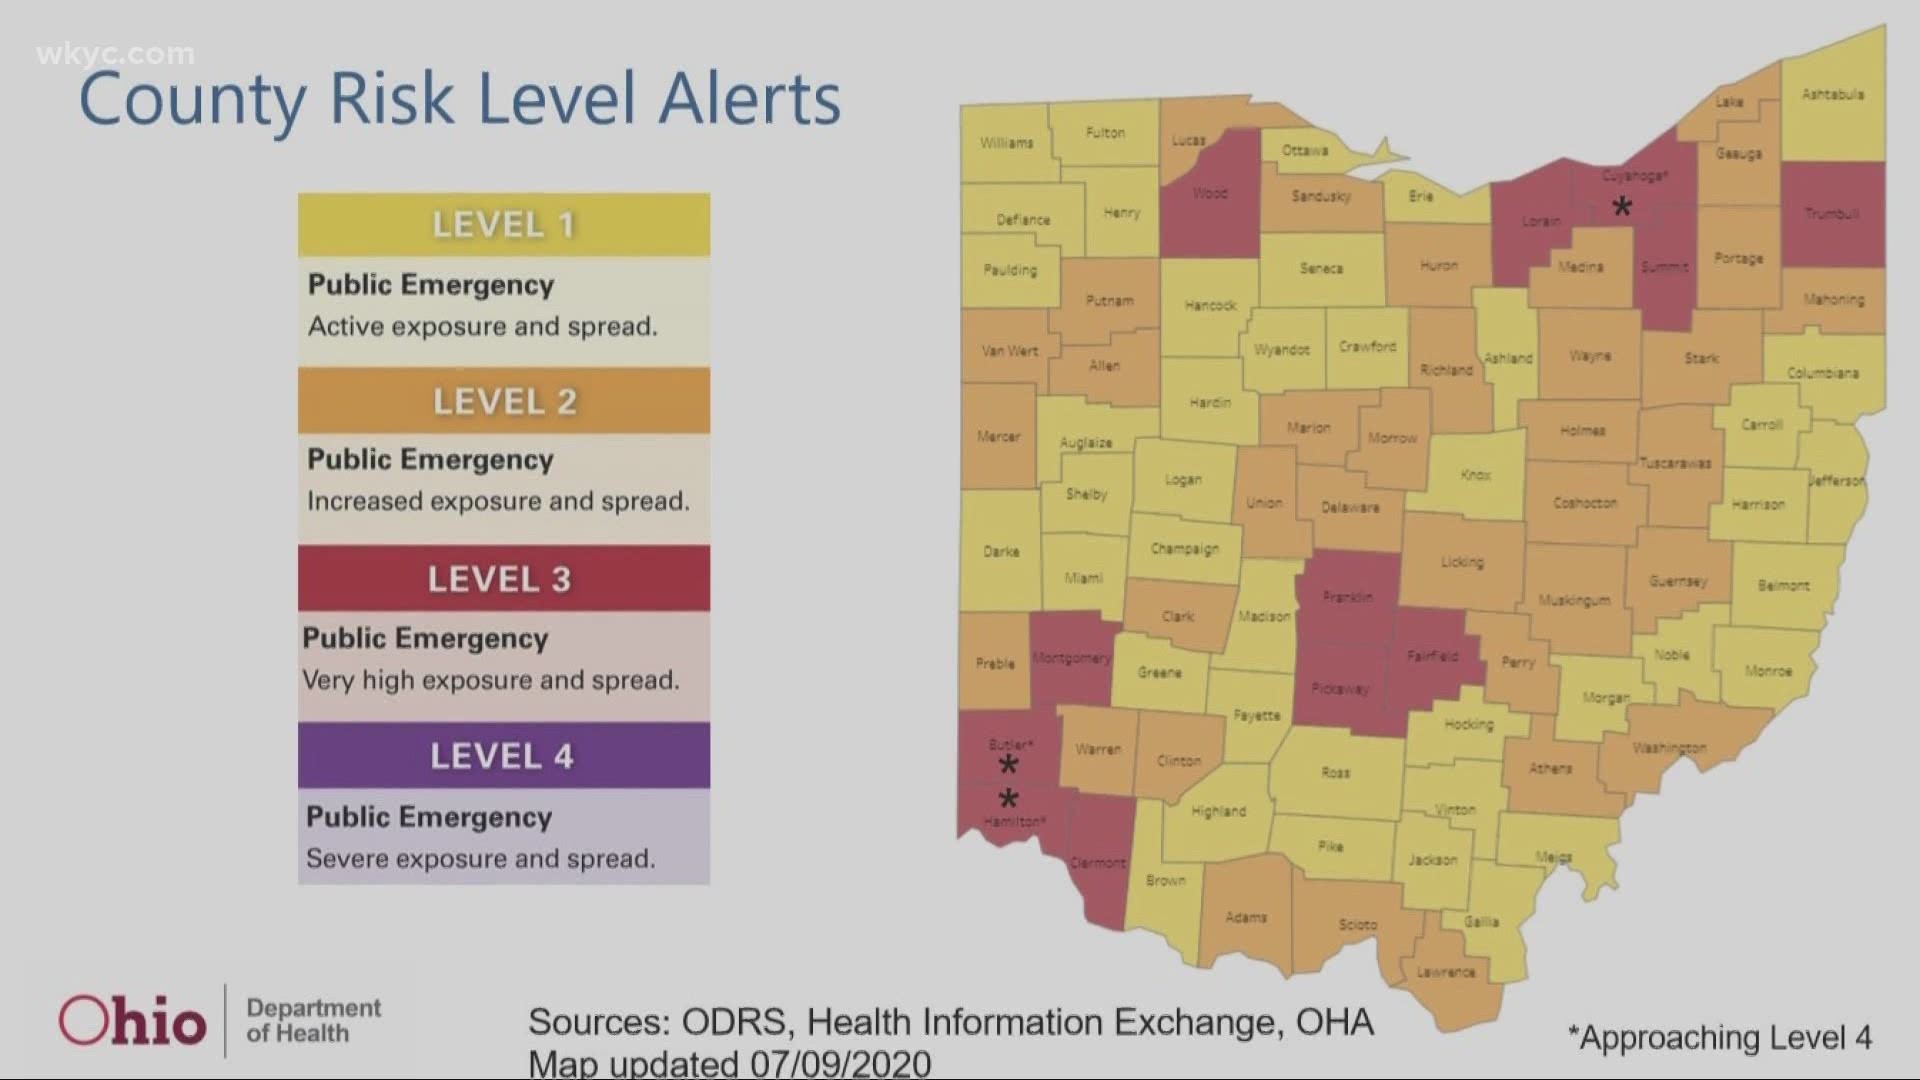 Ohio Gov. Mike DeWine has issued a new coronavirus alert system that designates risk levels in each county. Here's an explanation of how the alert system works.